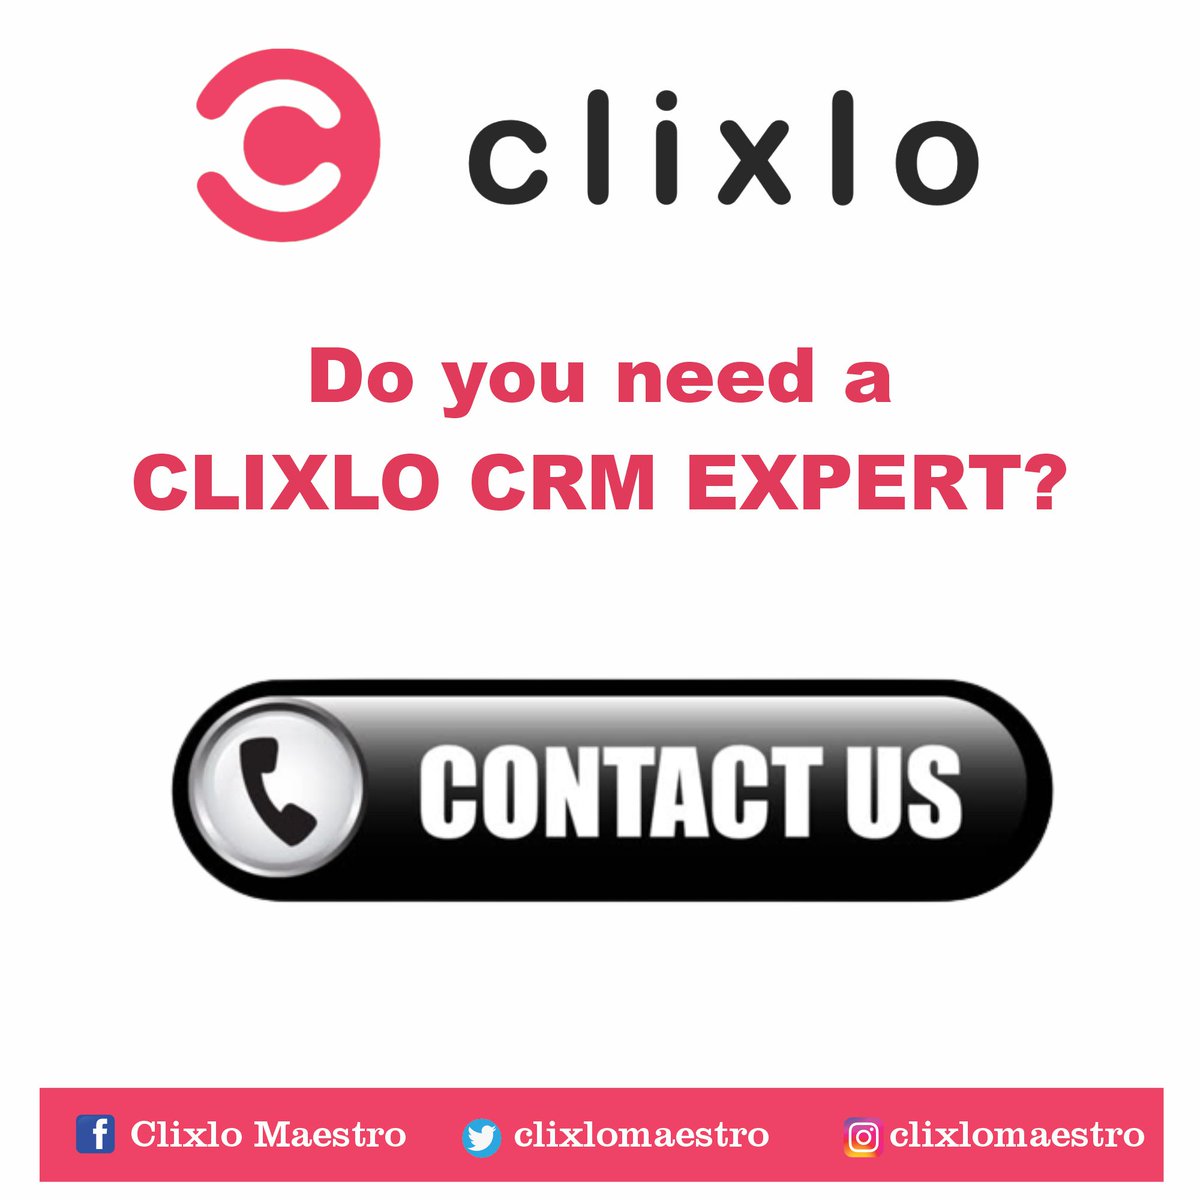 Contact Us for all your Clixlo CRM Projects now!

#join #membersonly #healingcircle #bridgingthegap #stress #ilovewobc #soulsisters #mpltribe #academy #tsacc #rollieallaire #lifeandwellnesscoach #moonmedicine #mindbodyheartsoul #womeninspiringwomen #barre #coaching #kpop #hiphop